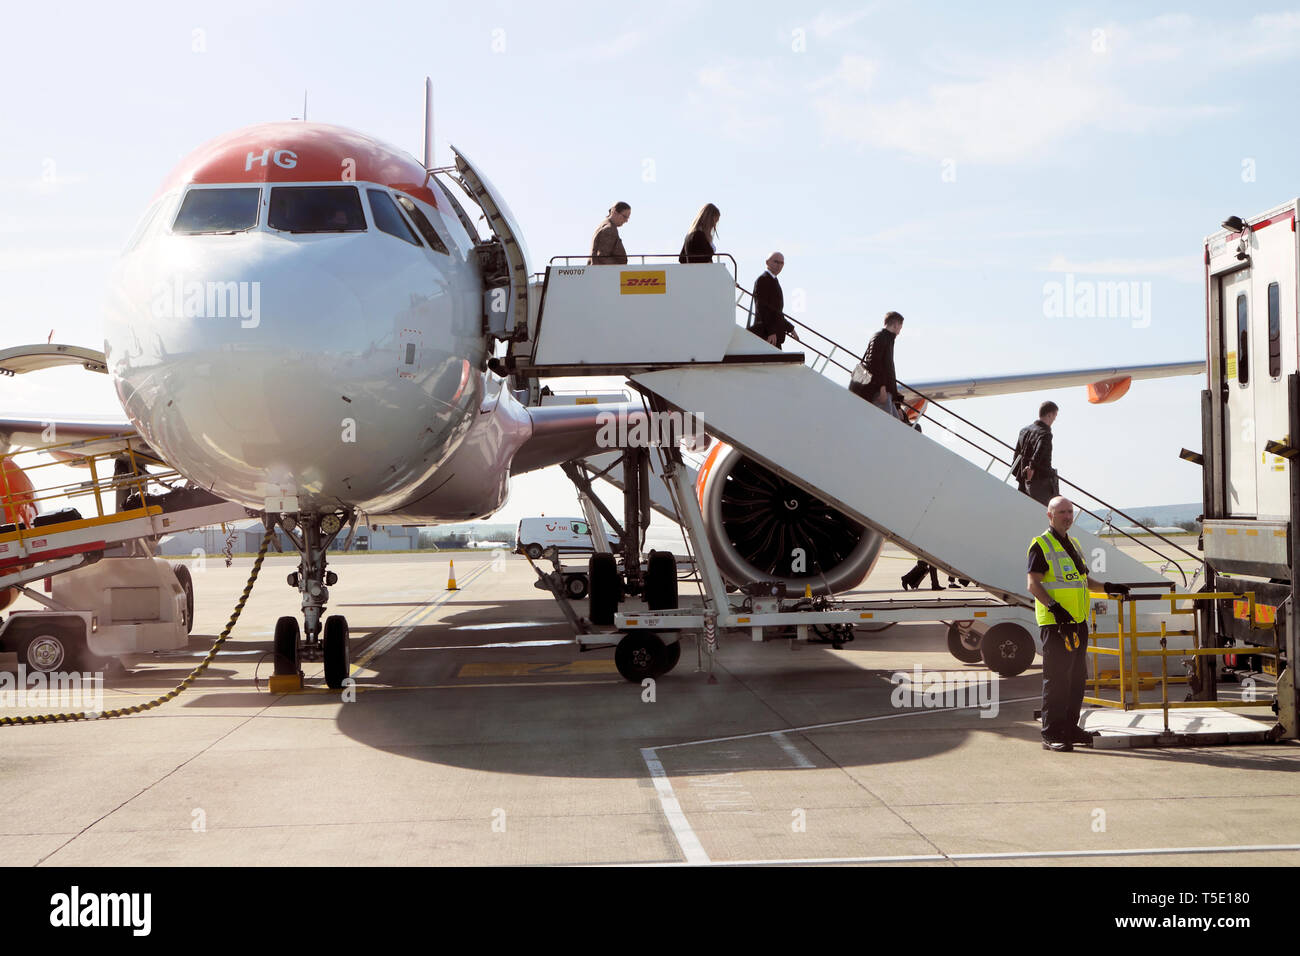 Front side view of passengers getting off leaving an Easy Jet aircraft plane on the tarmac at Bristol Airport England UK Great Britain  KATHY DEWITT Stock Photo